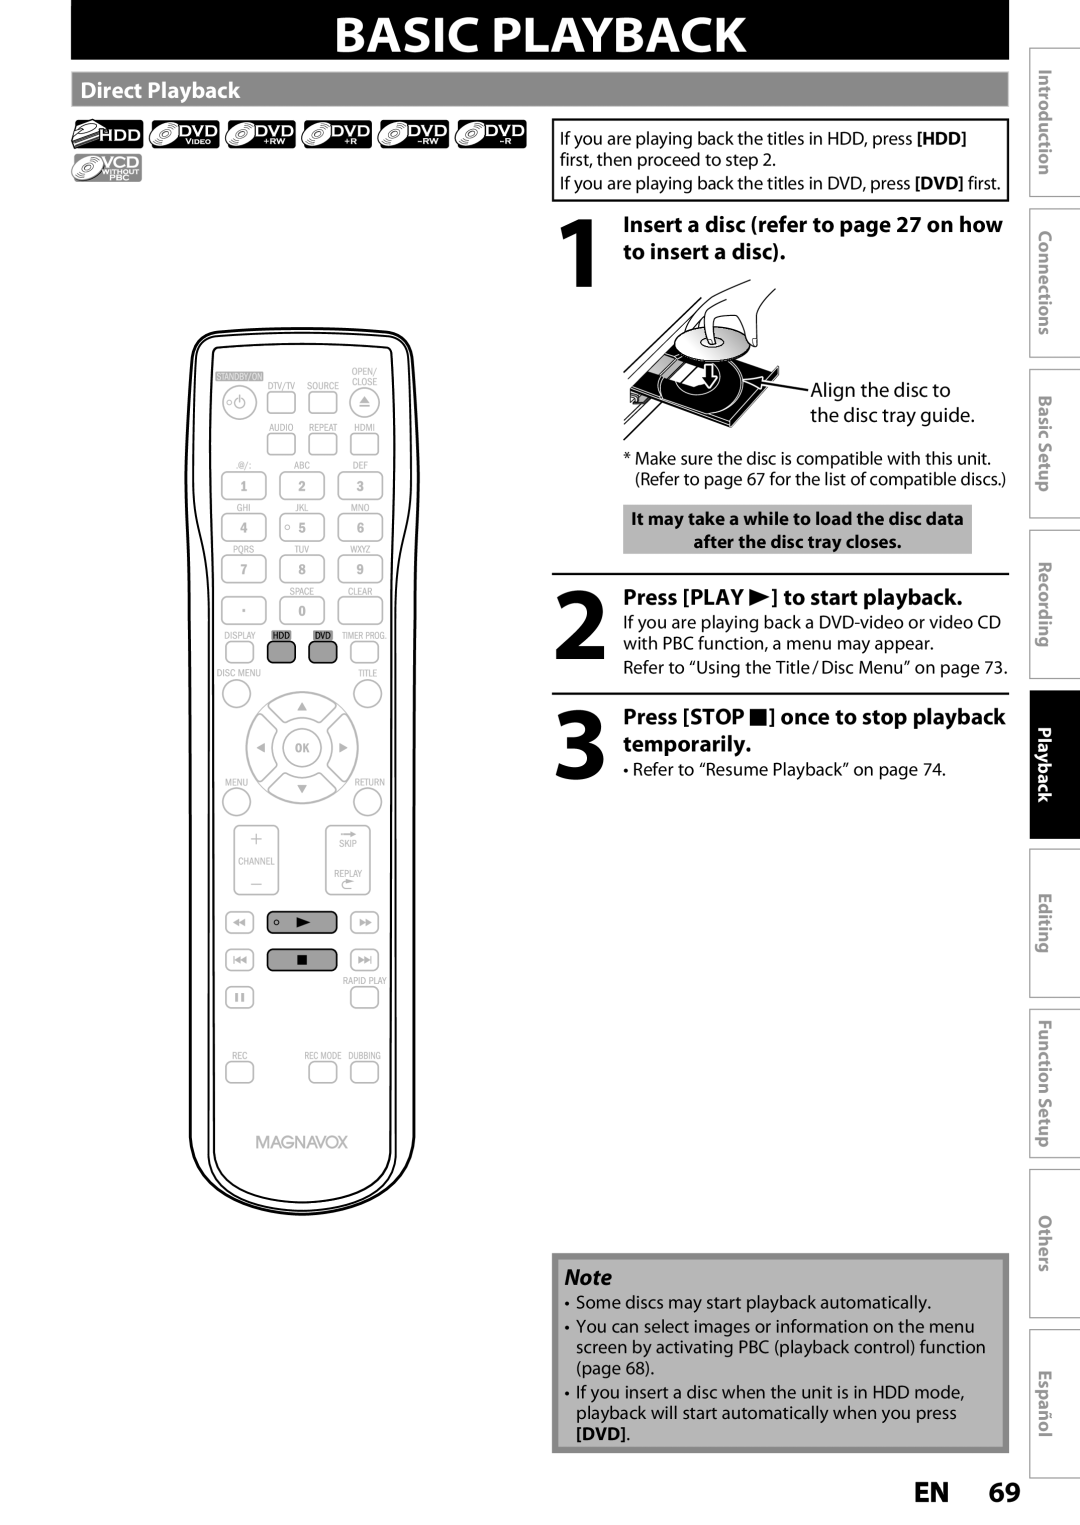 Magnavox MDR533H Basic Playback, to insert a disc, temporarily, Direct Playback, Insert a disc refer to page 27 on how 